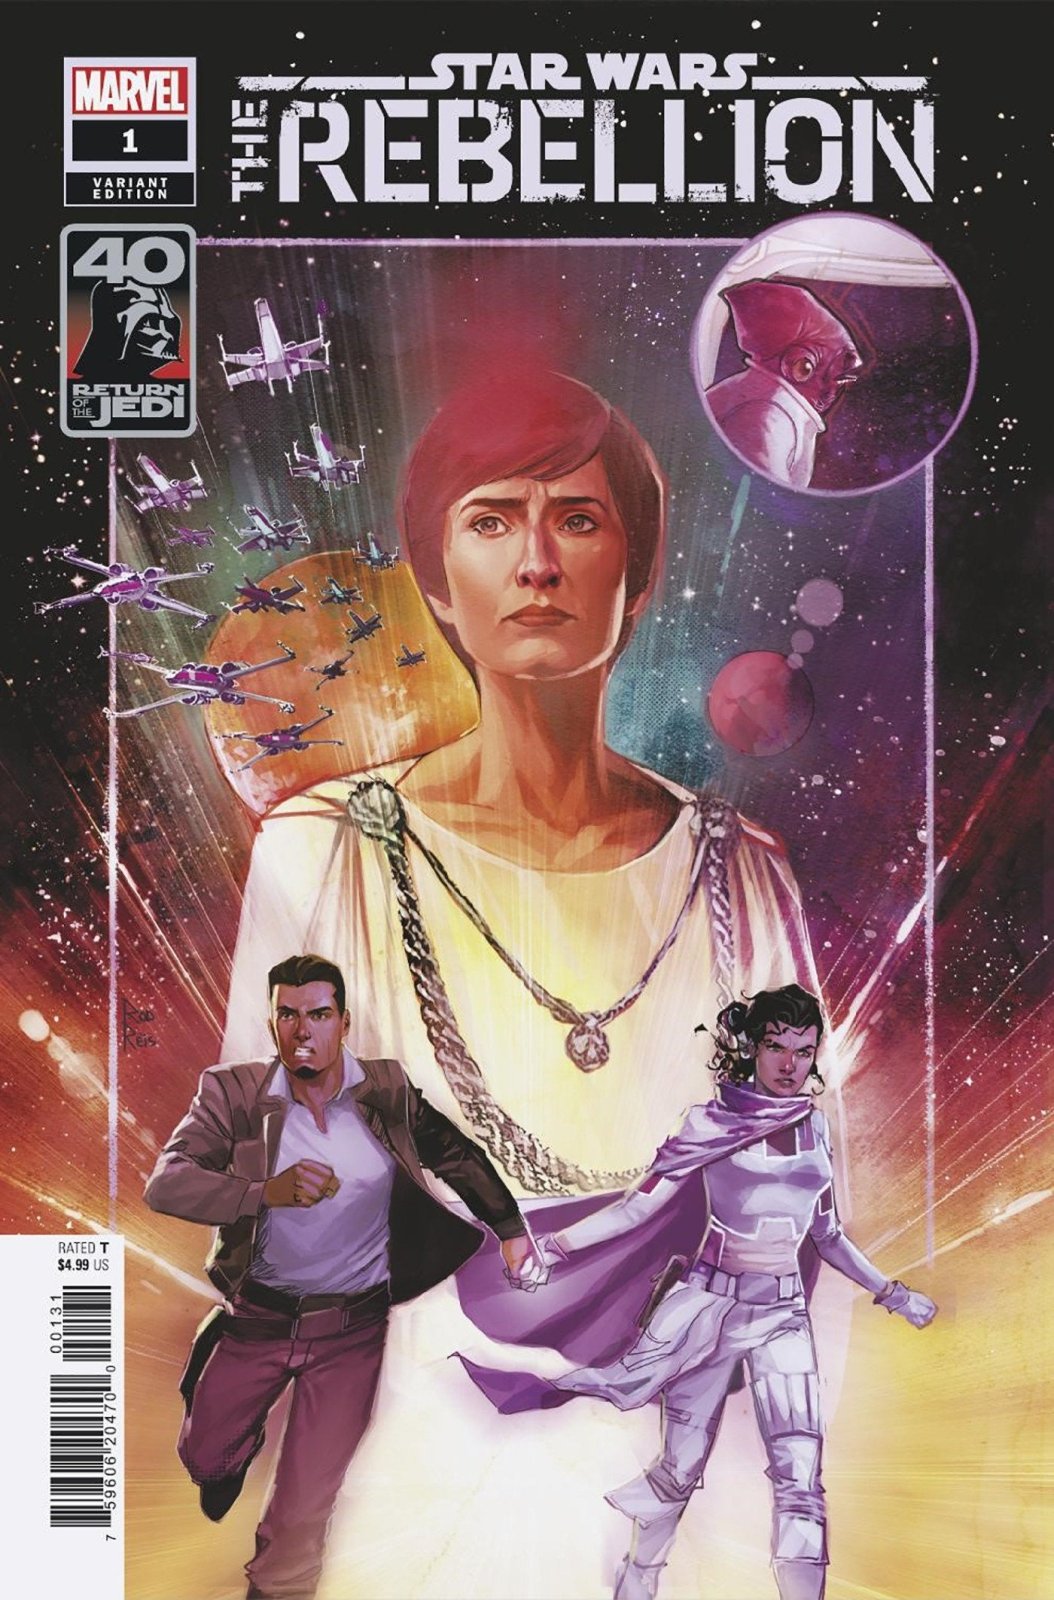 Star Wars: Return Of The Jedi - The Rebellion 1 Rod Reis Variant - The Fourth Place